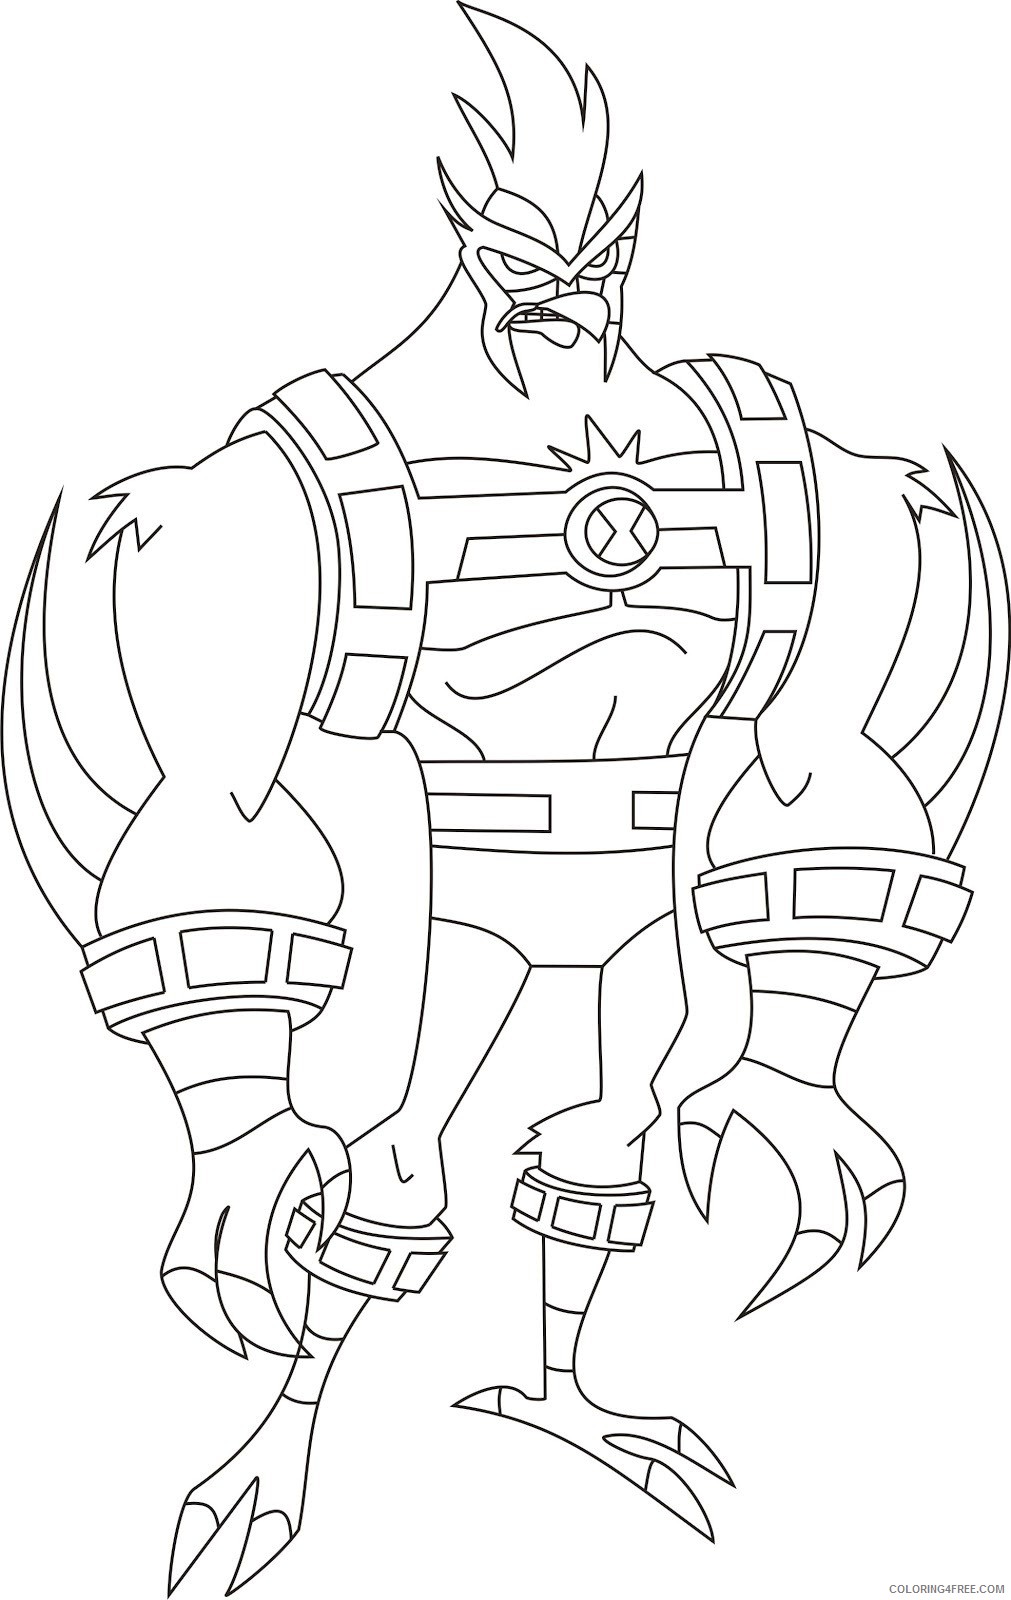 Ben 10 Coloring Pages Cartoons Ben 10 Omniverse Printable 2020 1299 Coloring4free